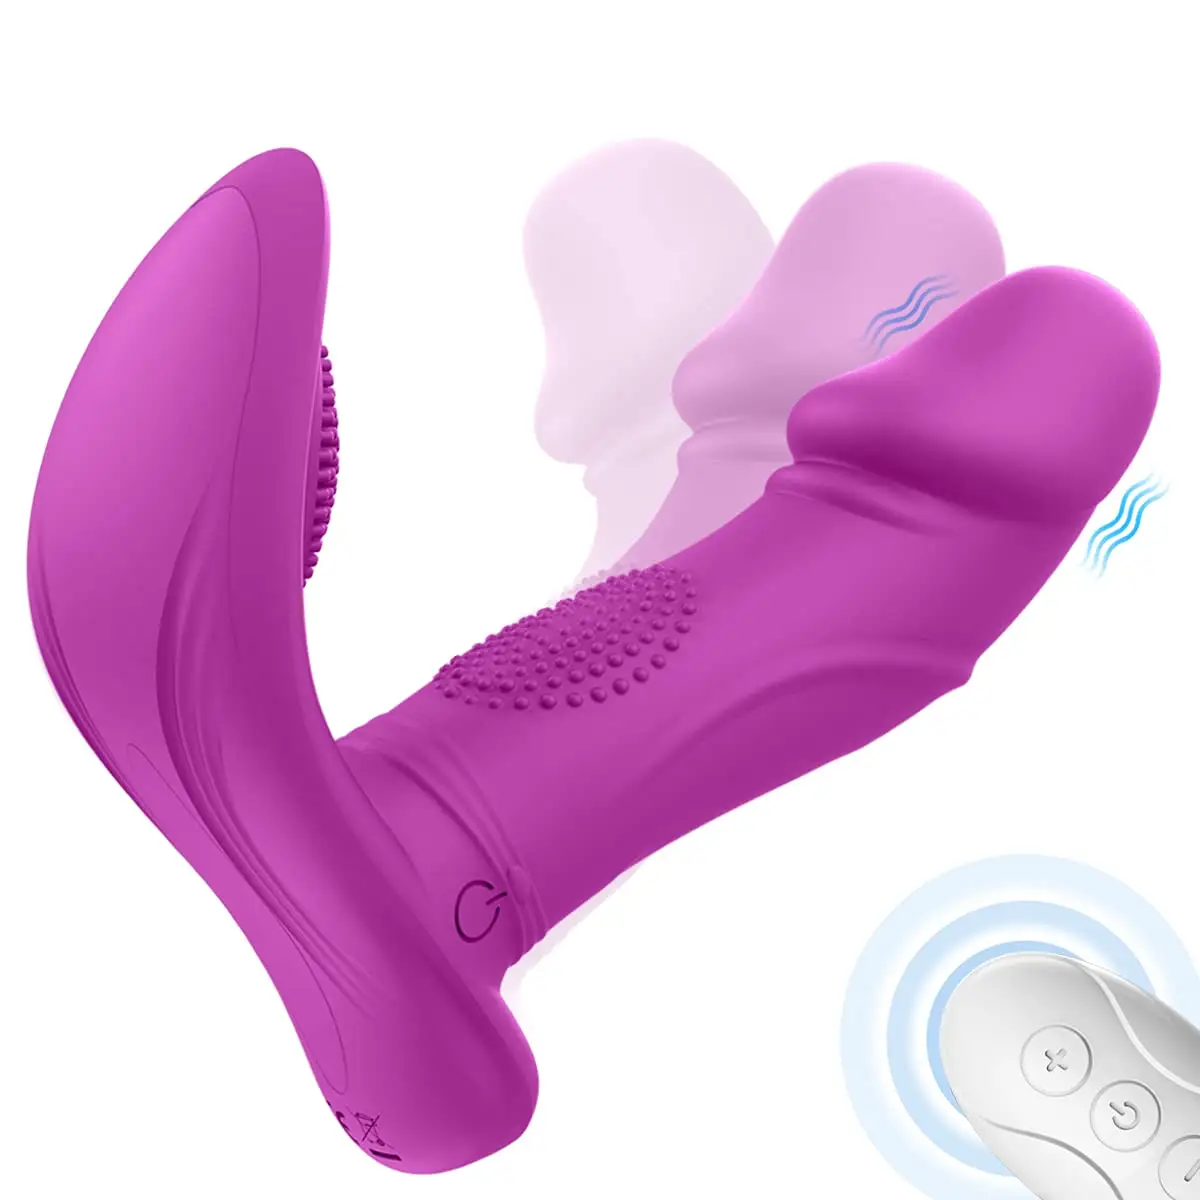 Wearable Vibrator Mimic Finger Quiet Panty Vibrator with Remote 3 Wiggling 7 Vibration G Spot Sex Toys for Women